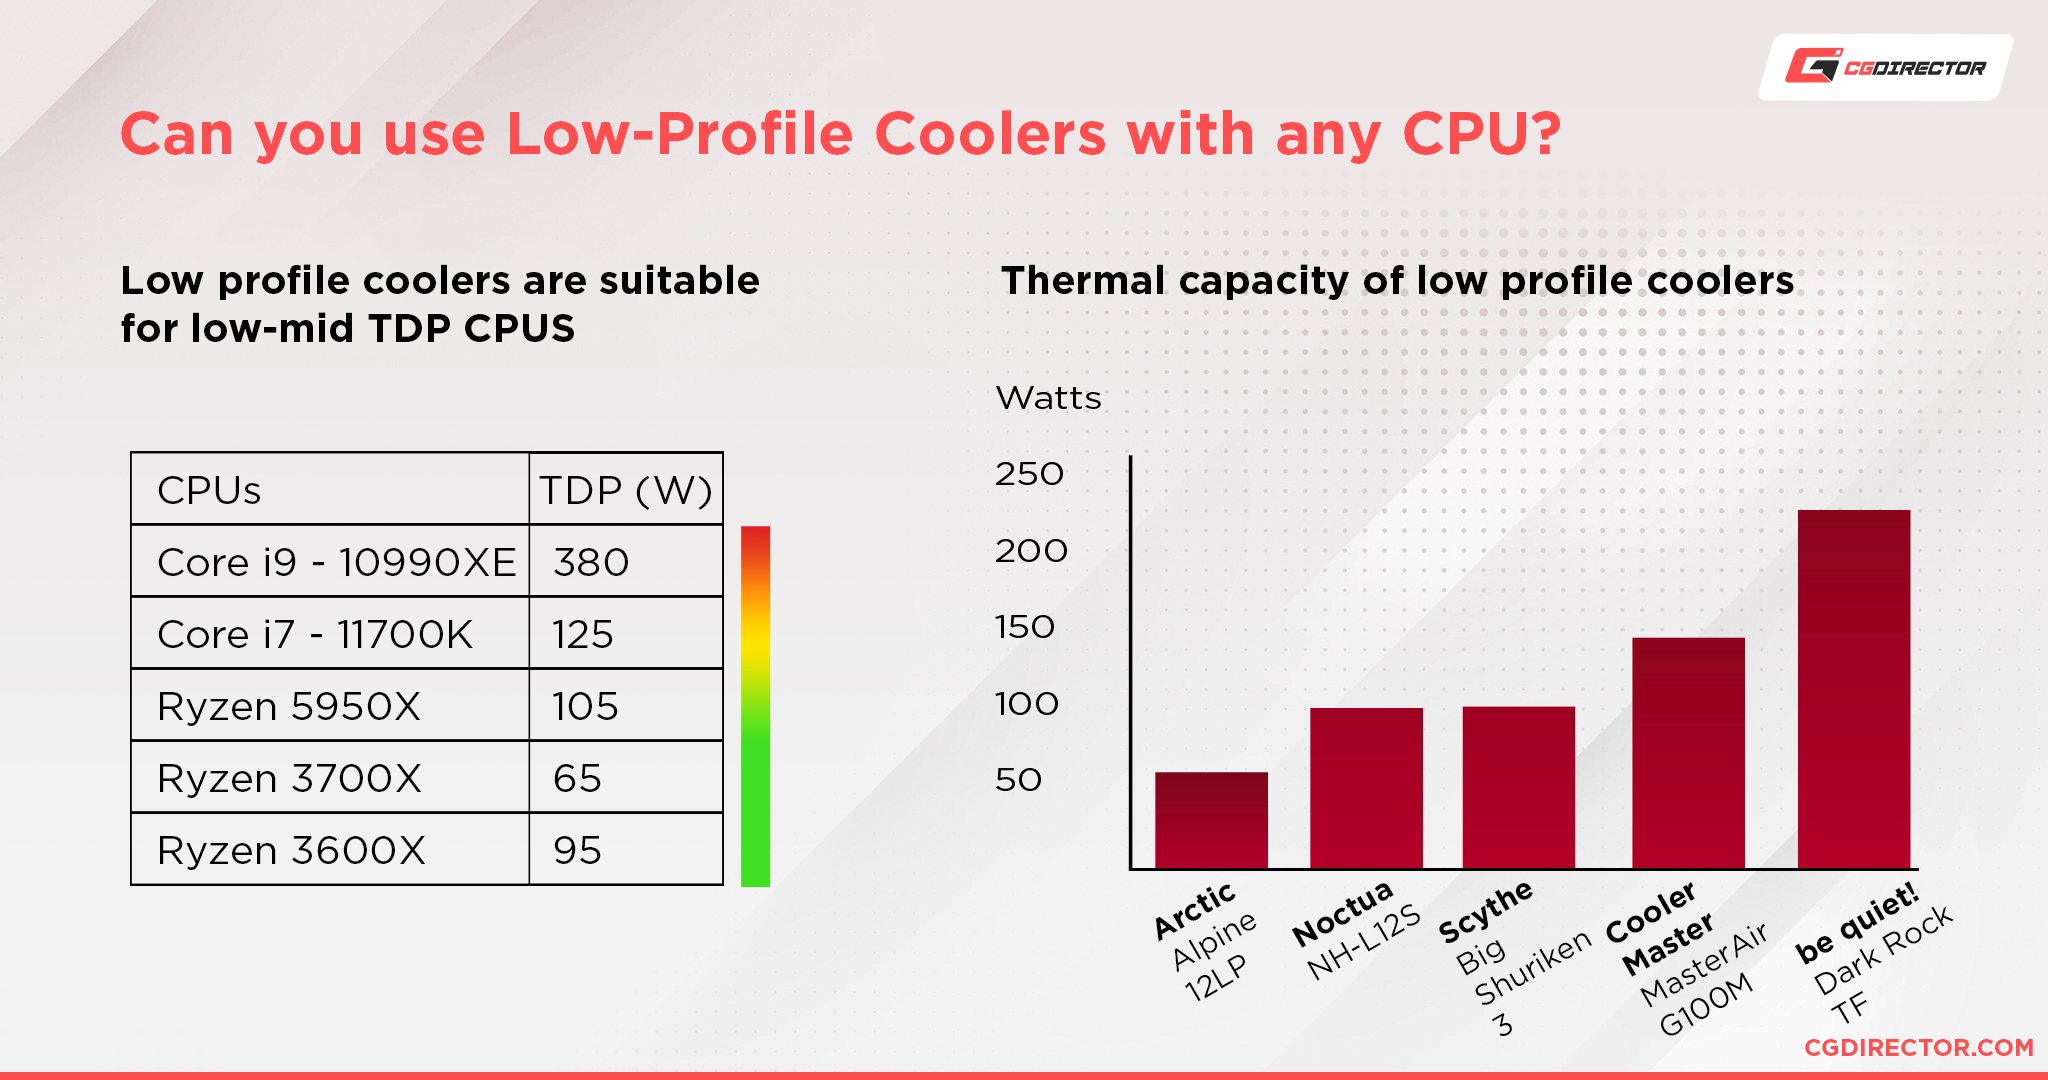 Can you use Low-Profile Coolers with any CPU